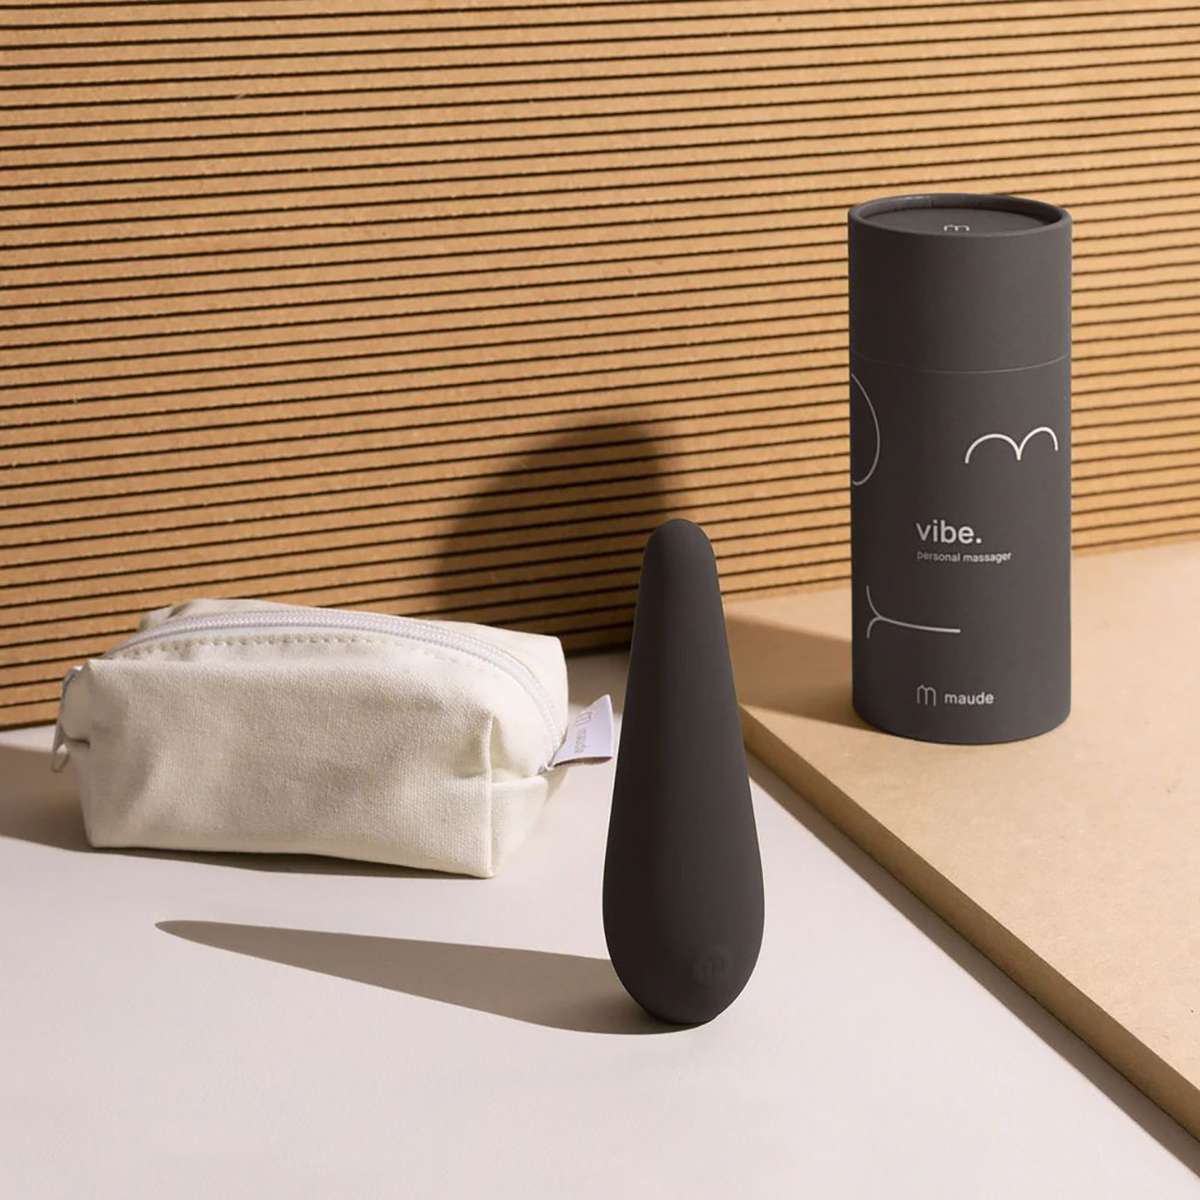 This $49 Vibrator Brings Shoppers to a "Whole Other Level of Euphoria"